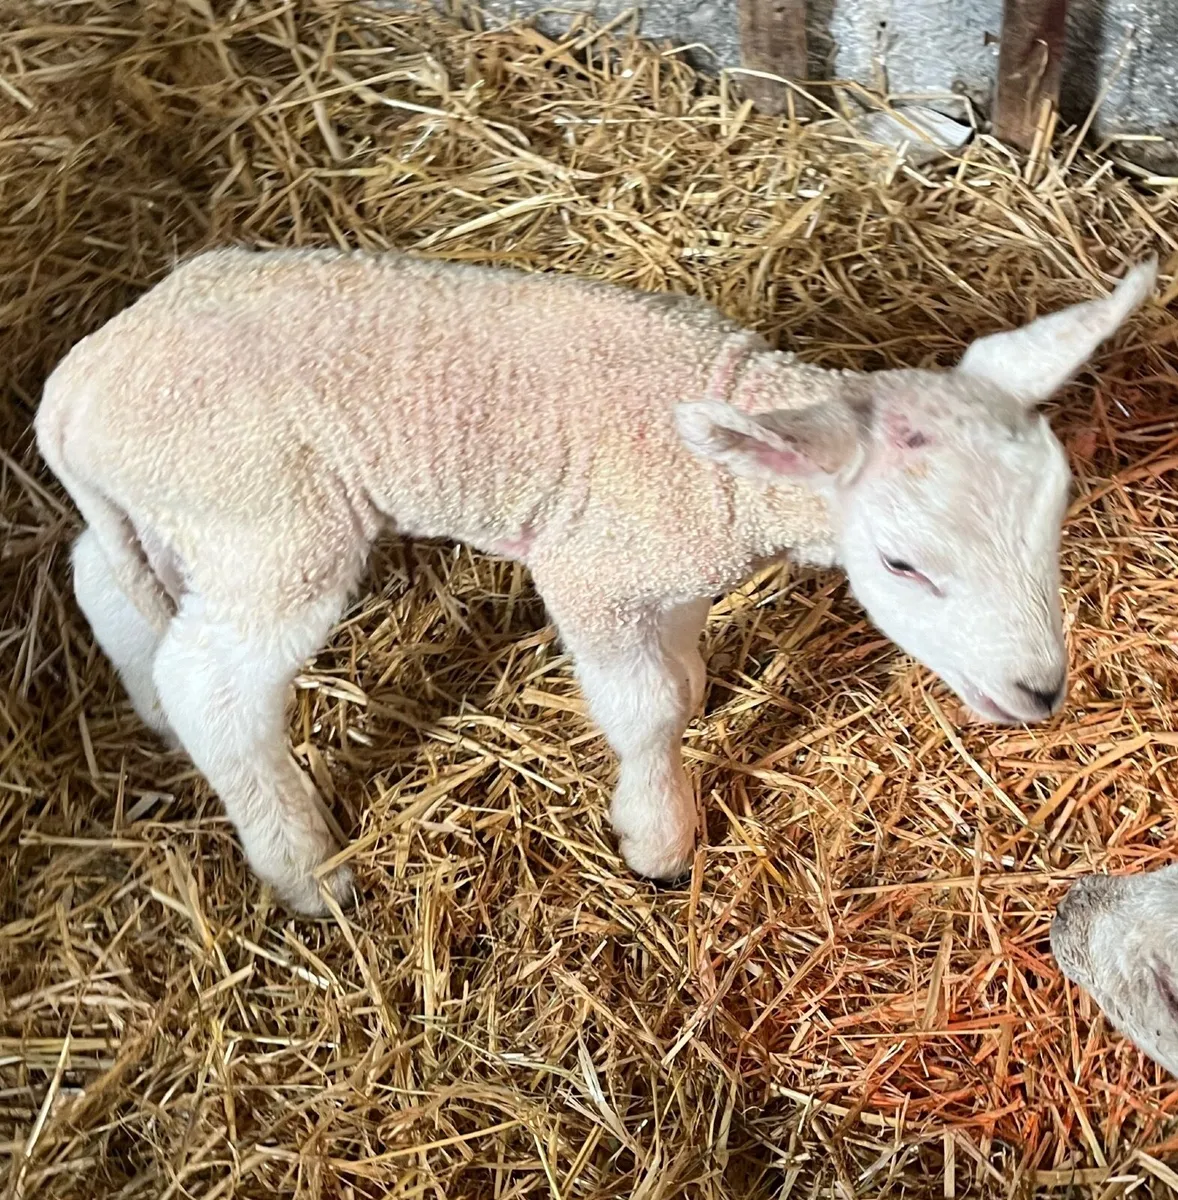 Foster lambs - Image 1